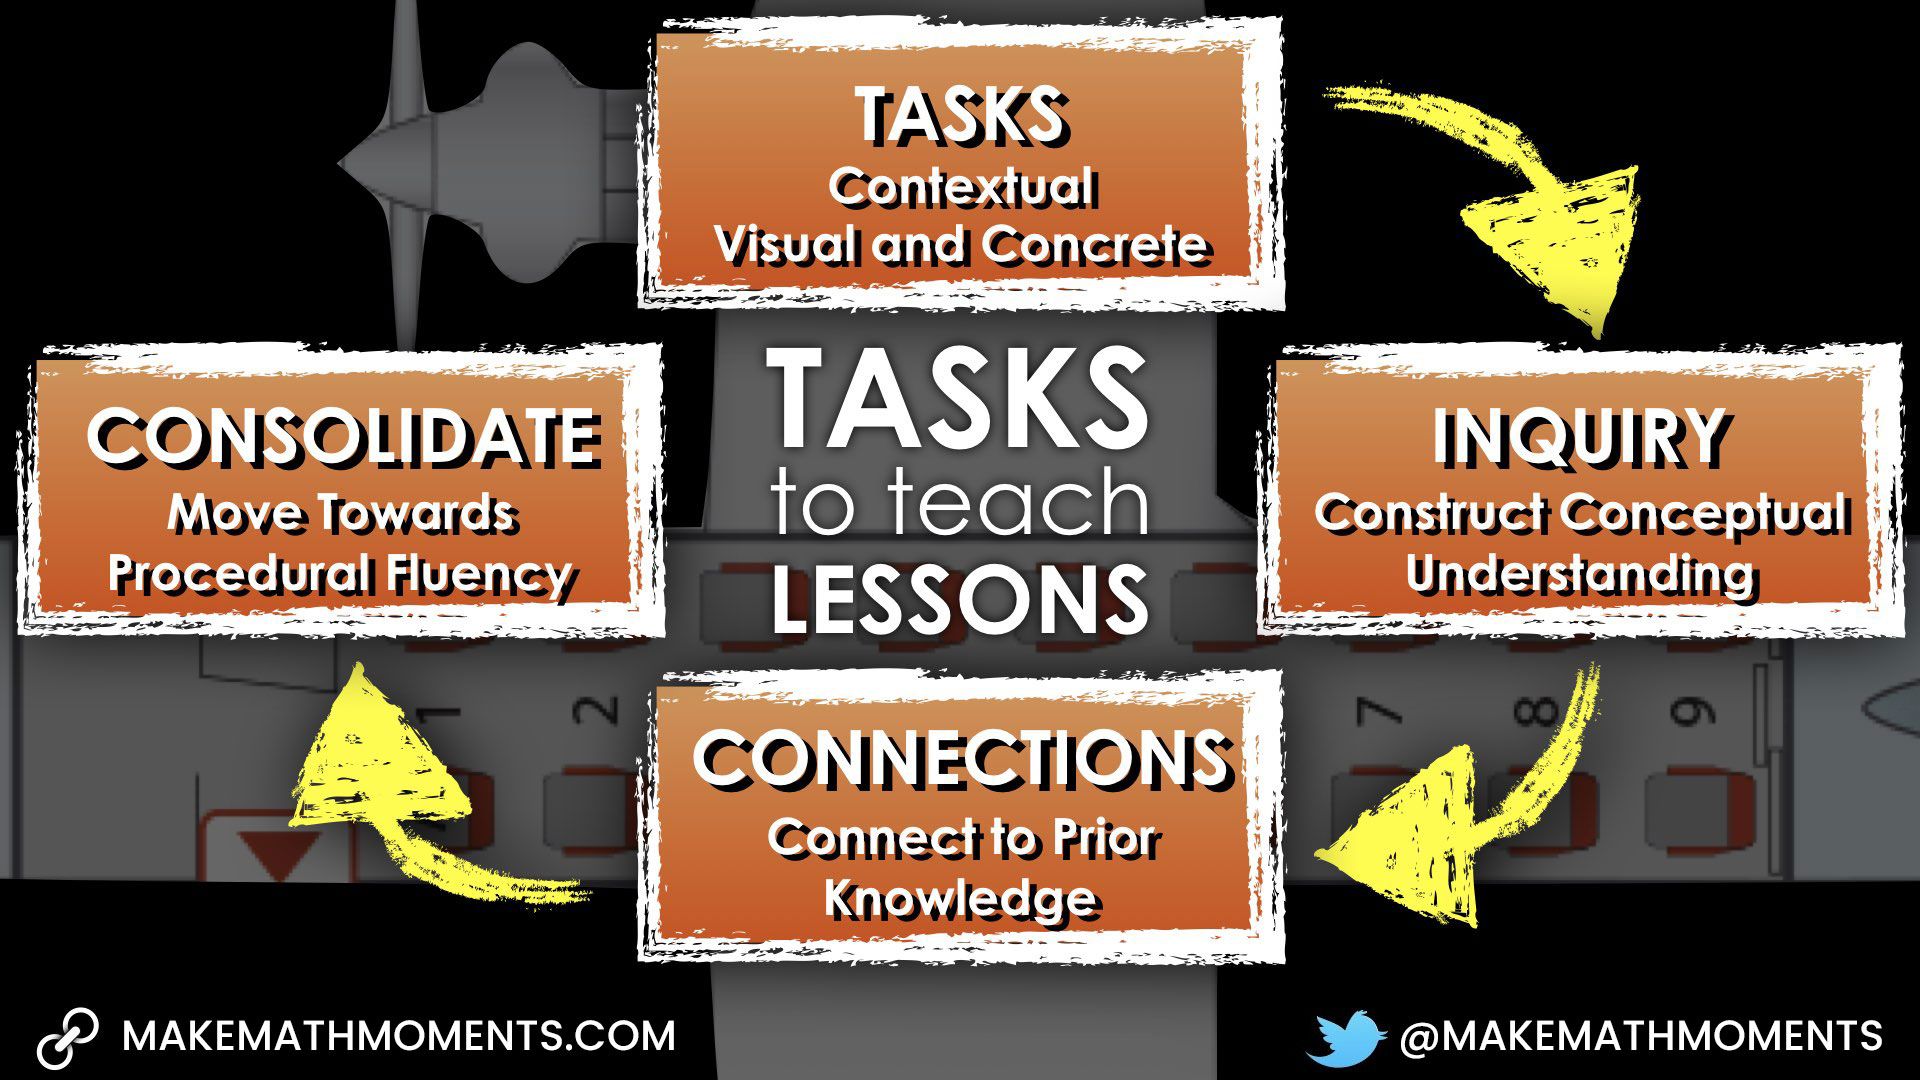 Using Tasks to Teach Lessons - Tasks Inquiry Connections Consolidate